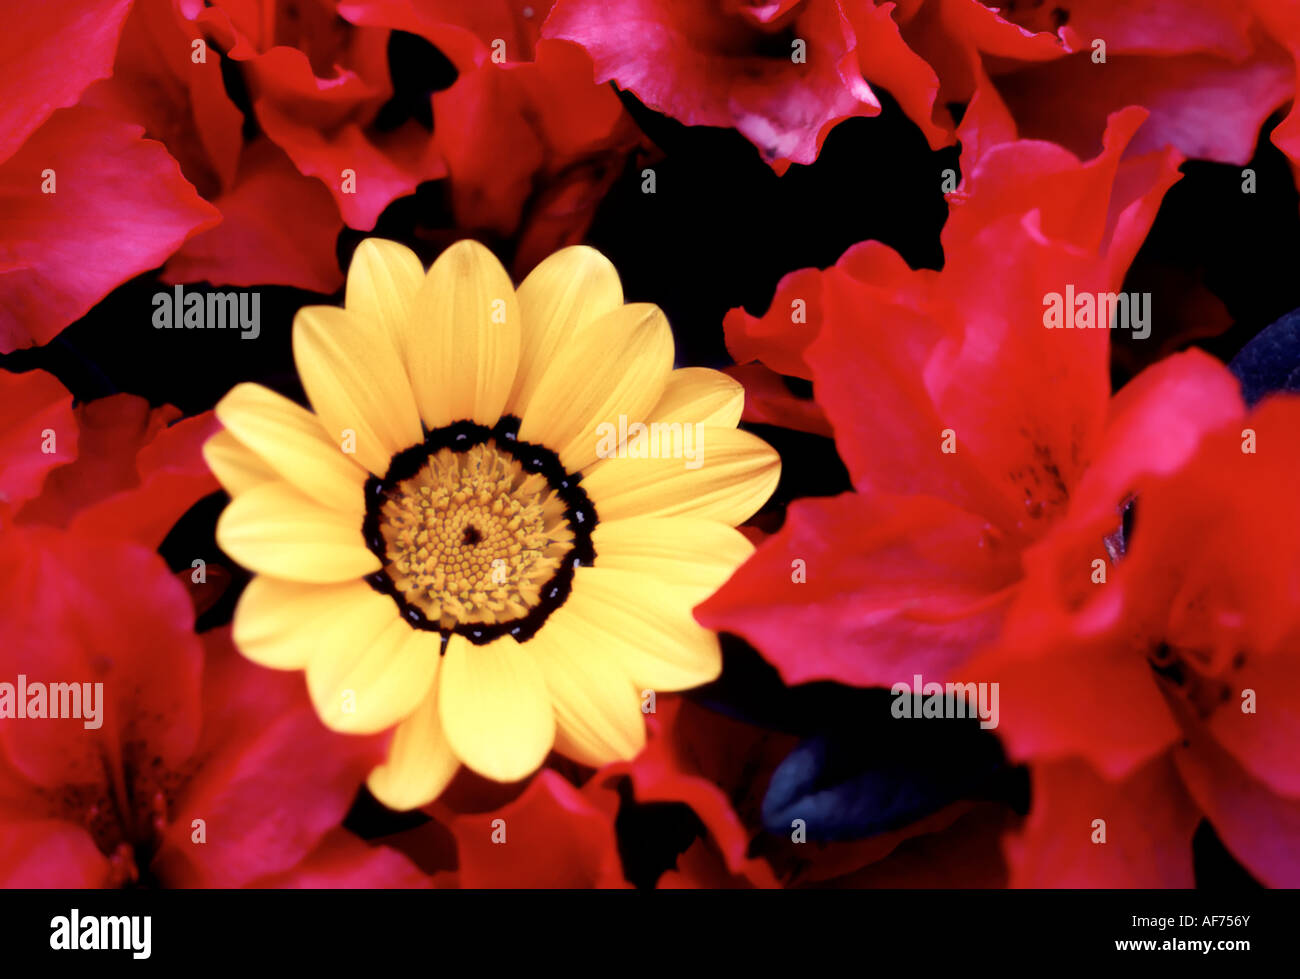 Yellow daisy surrounded by red blossoms Stock Photo